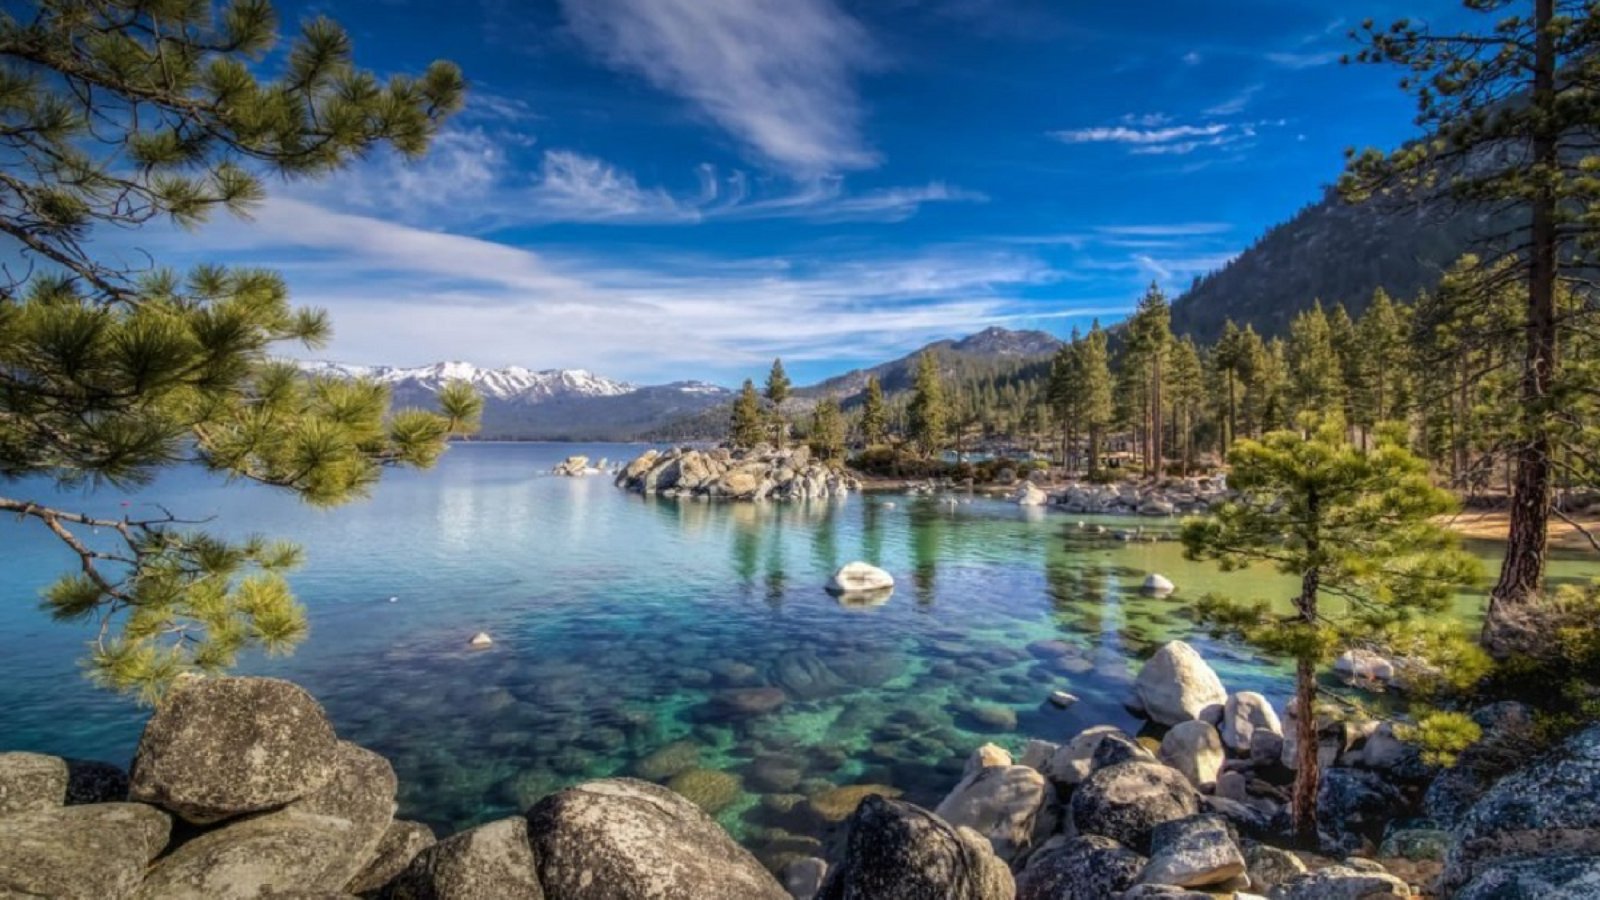 The Ultimate Vacation Travel Guide to Lake Tahoe California